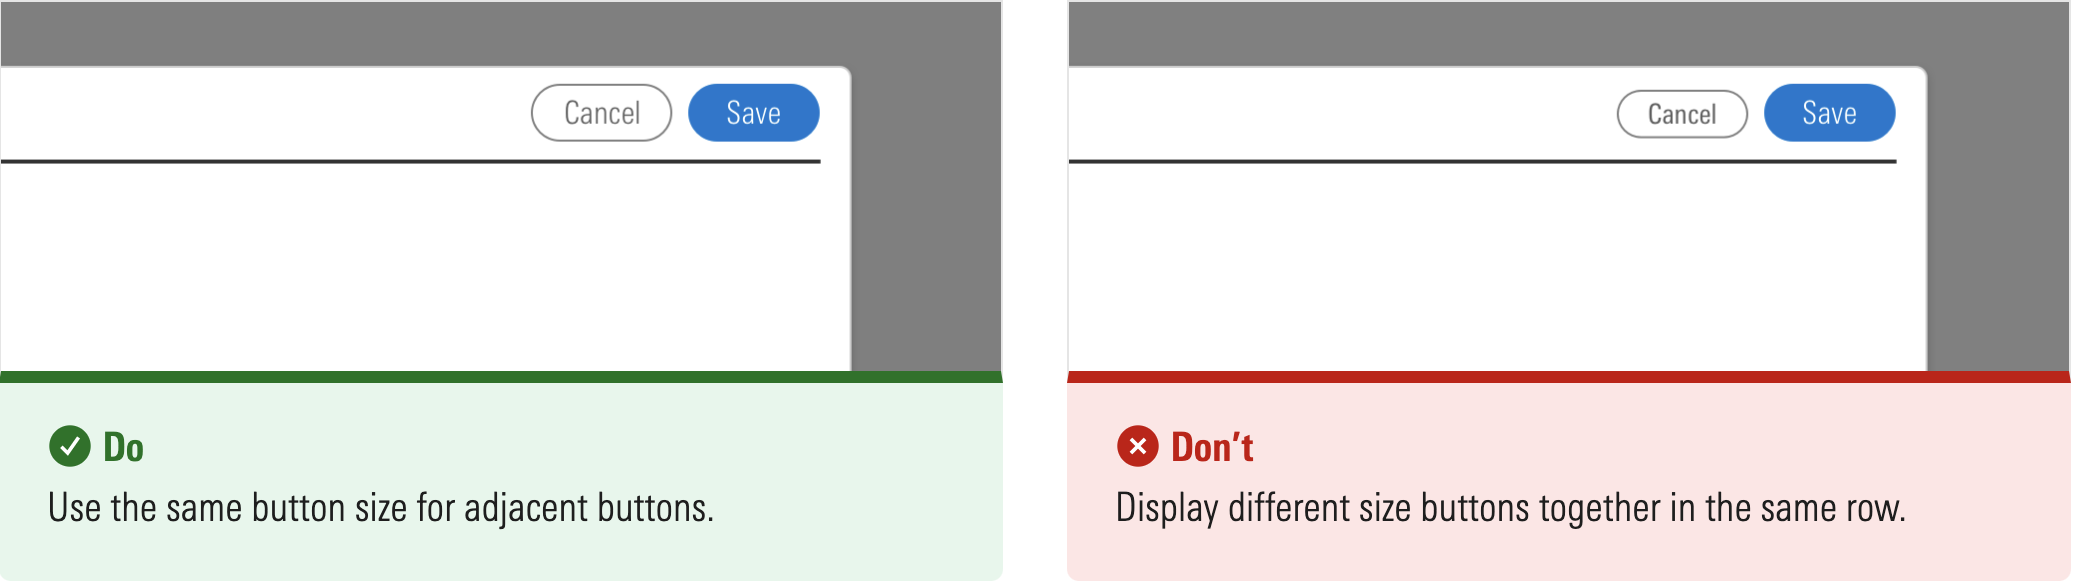 Use the same button size for adjacent buttons.